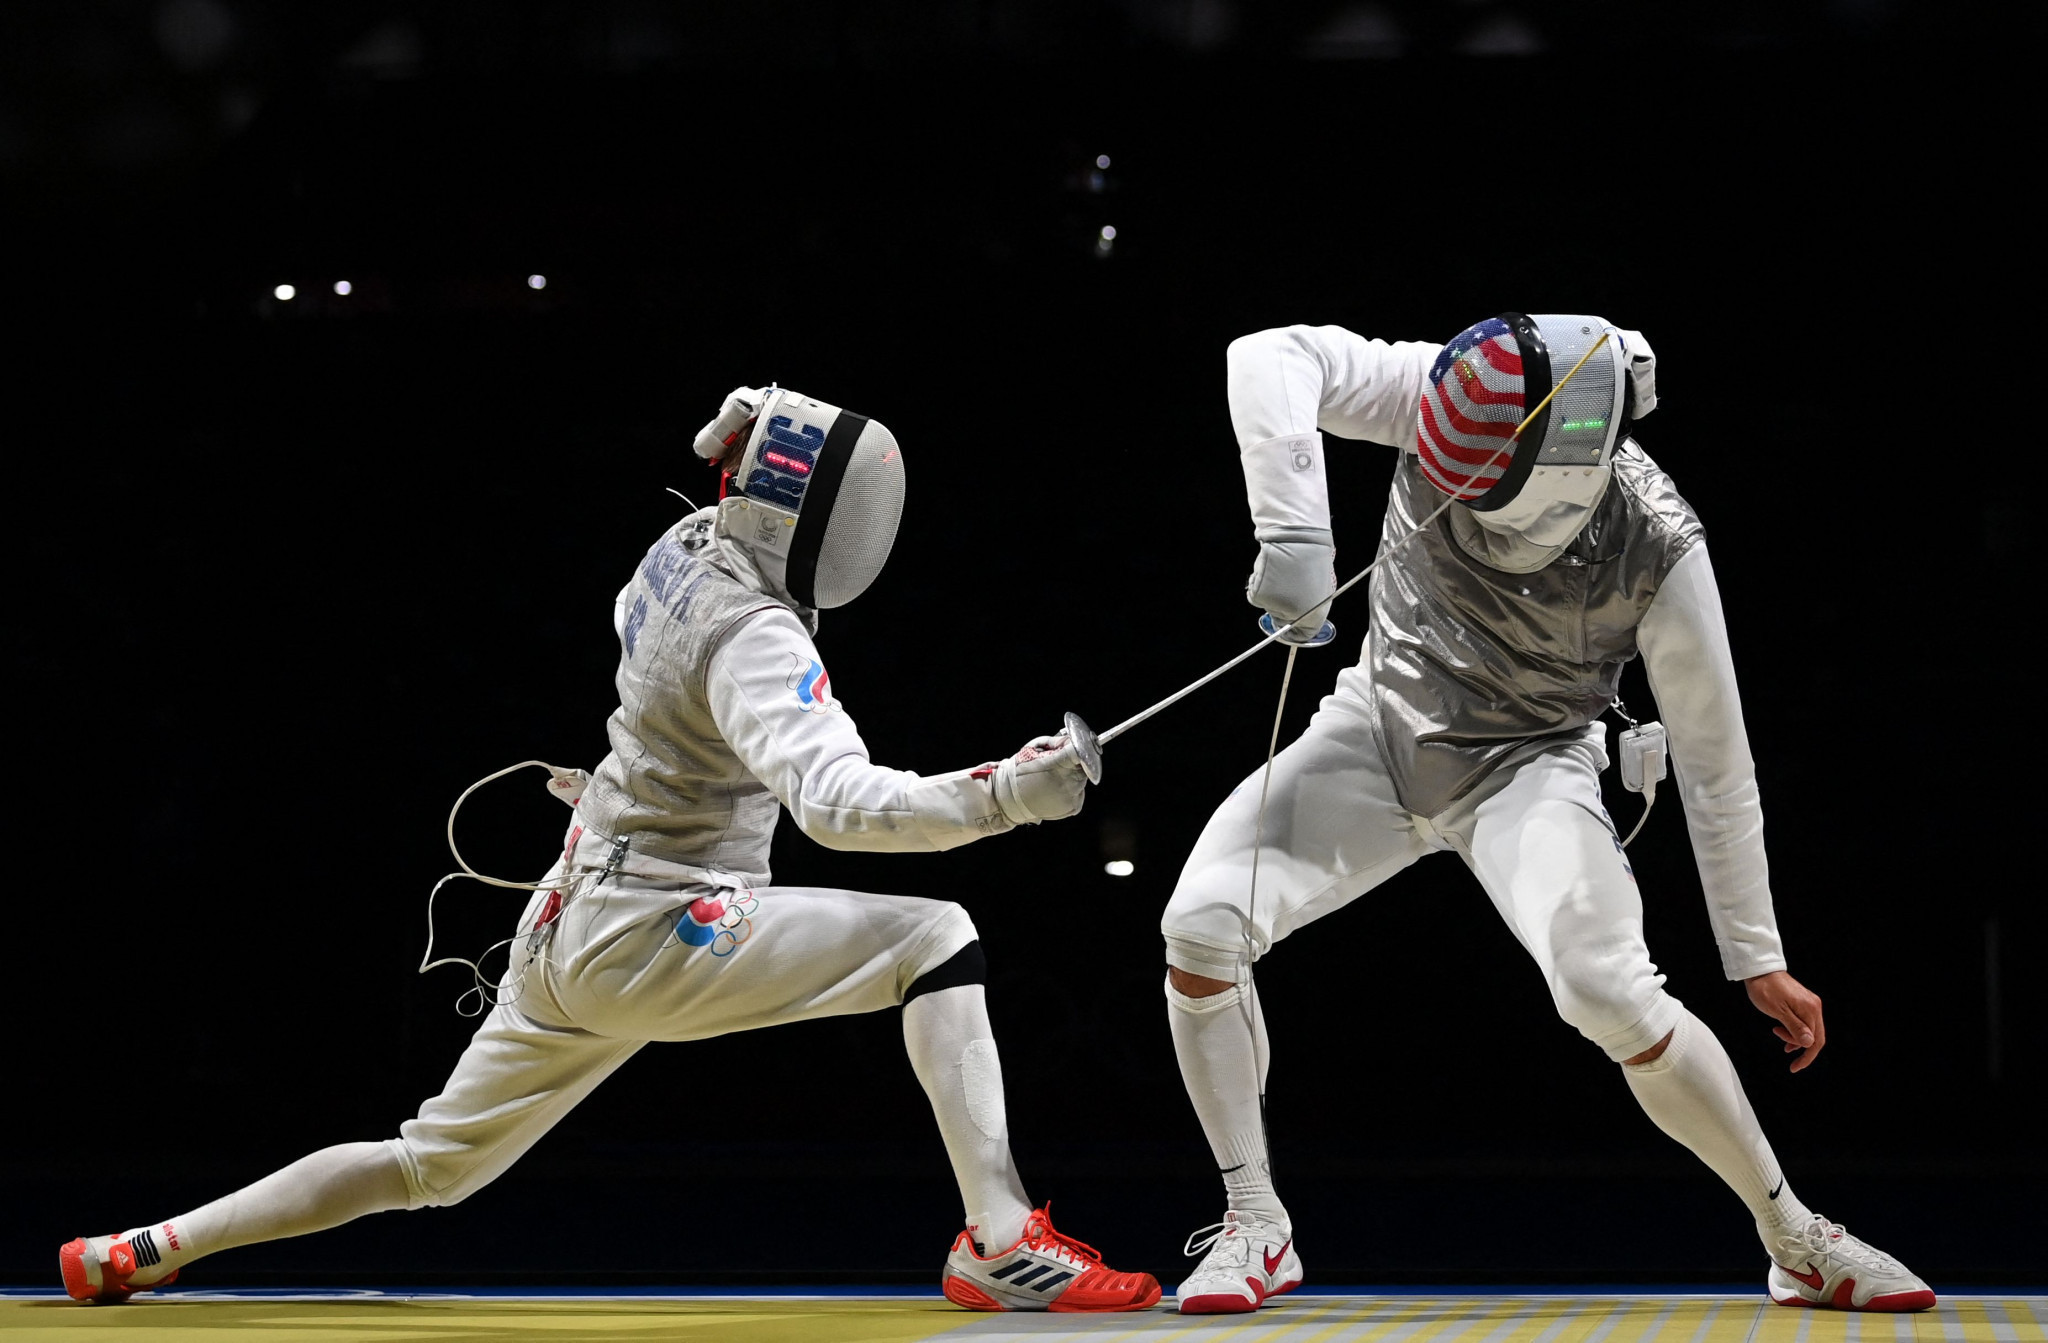 USA Fencing aims to increase access to sport through Fencing the Gap